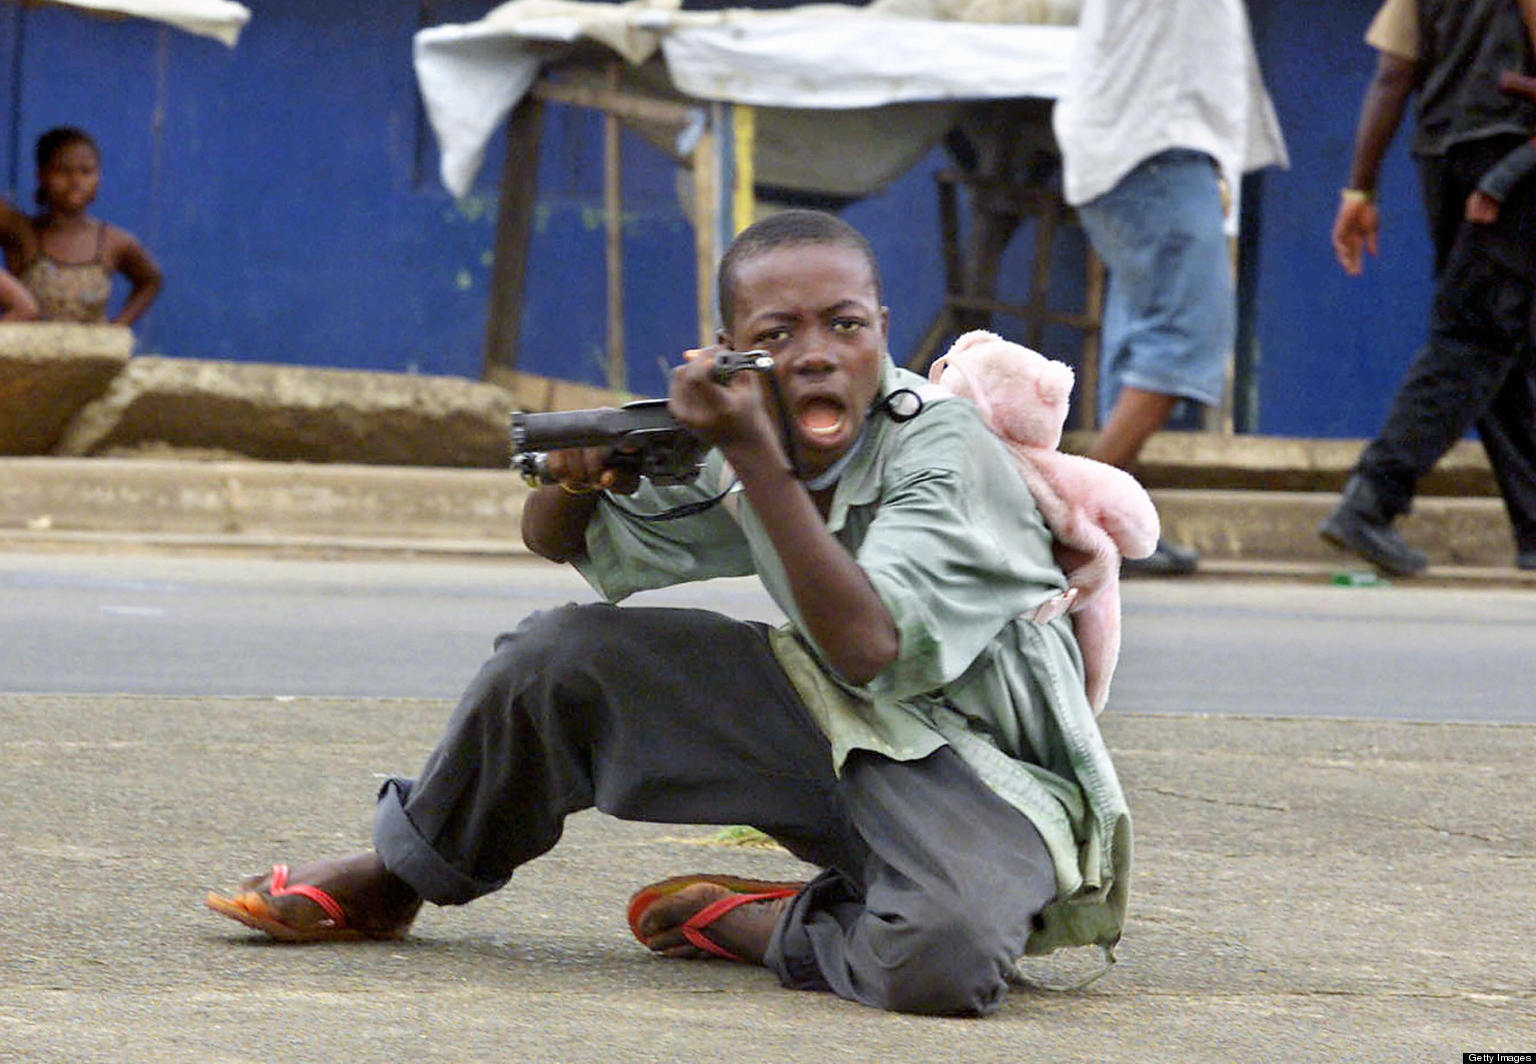 Monrovia, LIBERIA: (FILES) A child soldier wearing a teddy bear backpack points his gun at a photographer in a street of Monrovia 27 June 2003 where Liberian President Charles Taylor's forces took control of the city. At the iniatitve of French Foreign Minister Philippe Douste-Blazy, France will host 05 and 06 February 2007 in Paris an international conference on children involved in armed forces and armed groups called "Let US Free the Children of War". Co-presided by Philippe Douste-Blazy and Ann M. Veneman, executive director of UNICEF, and in the presence of Radhika Coomaraswamy, the UN secretary-general?s special representative for children in armed conflict, the conference will bring together representatives of nearly 60 countries, including many ministers, the European Union, many international organizations, including the United Nations, and representatives of civil society, in particular former child soldiers and NGO leaders active on the ground.  AFP PHOTO FILES GEORGES GOBET (Photo credit should read GEORGES GOBET/AFP/Getty Images)